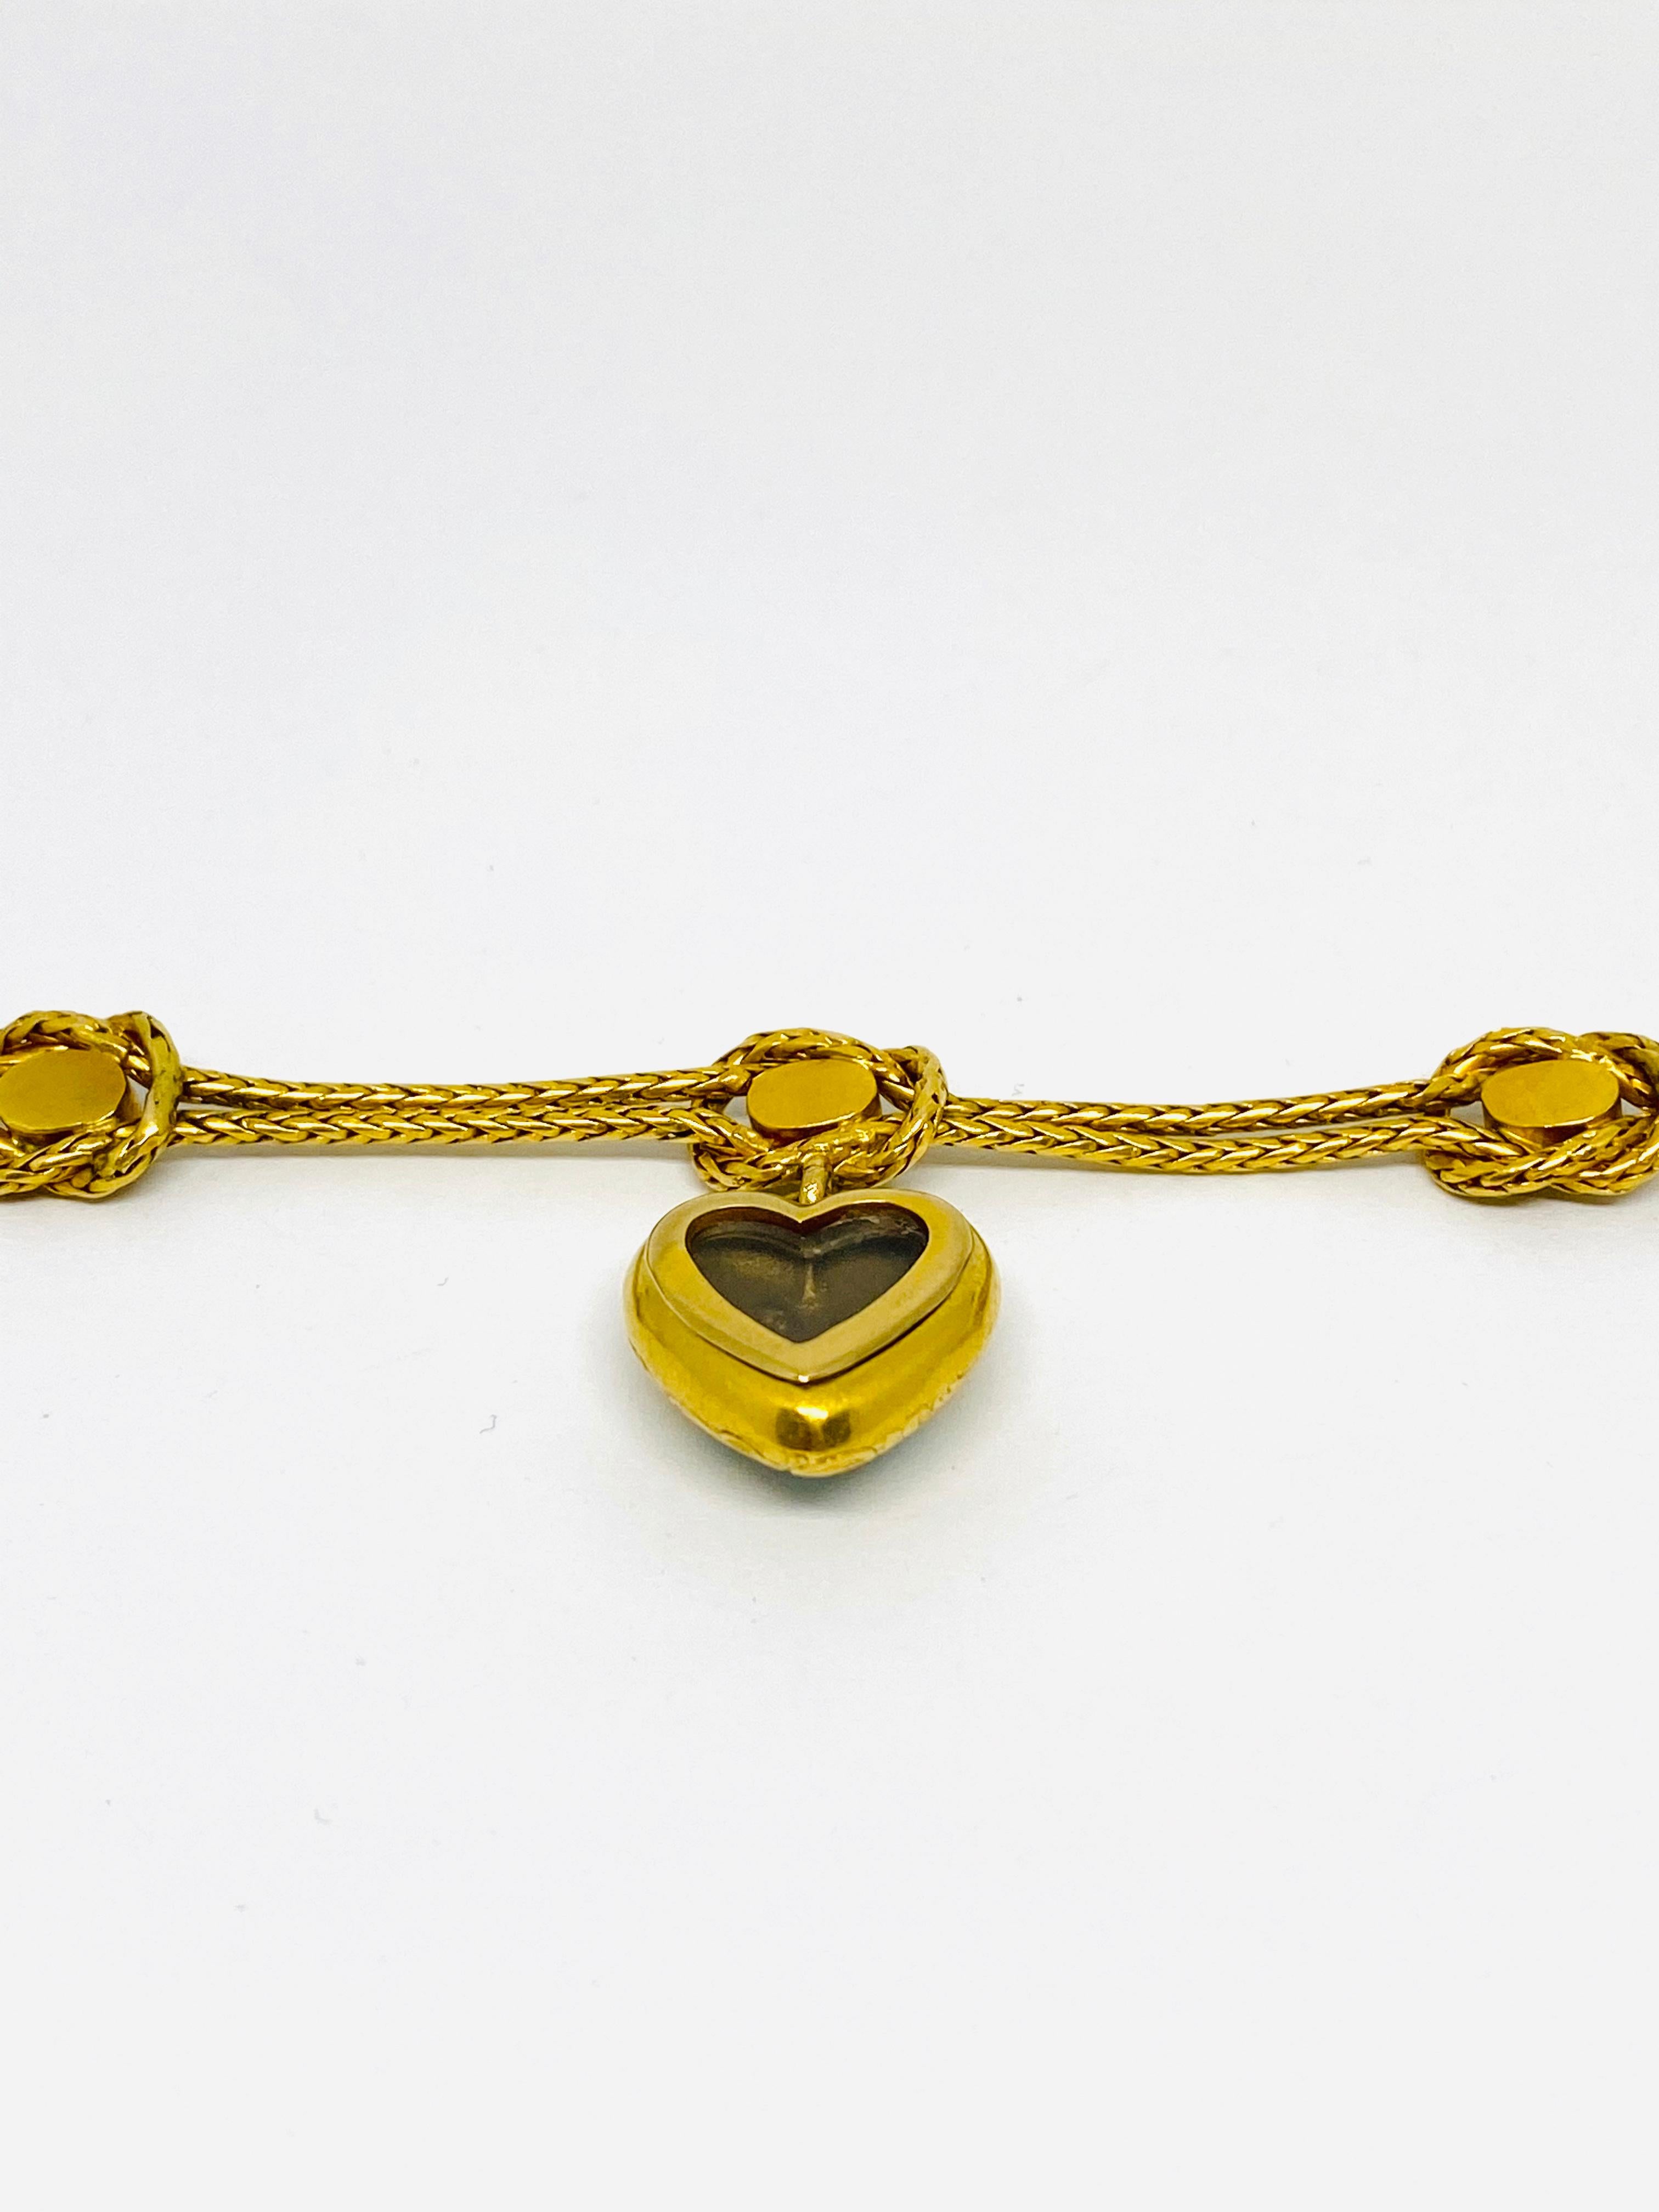 Antique Yellow Gold and Turquoise Bracelet w/ Heart Charm  1